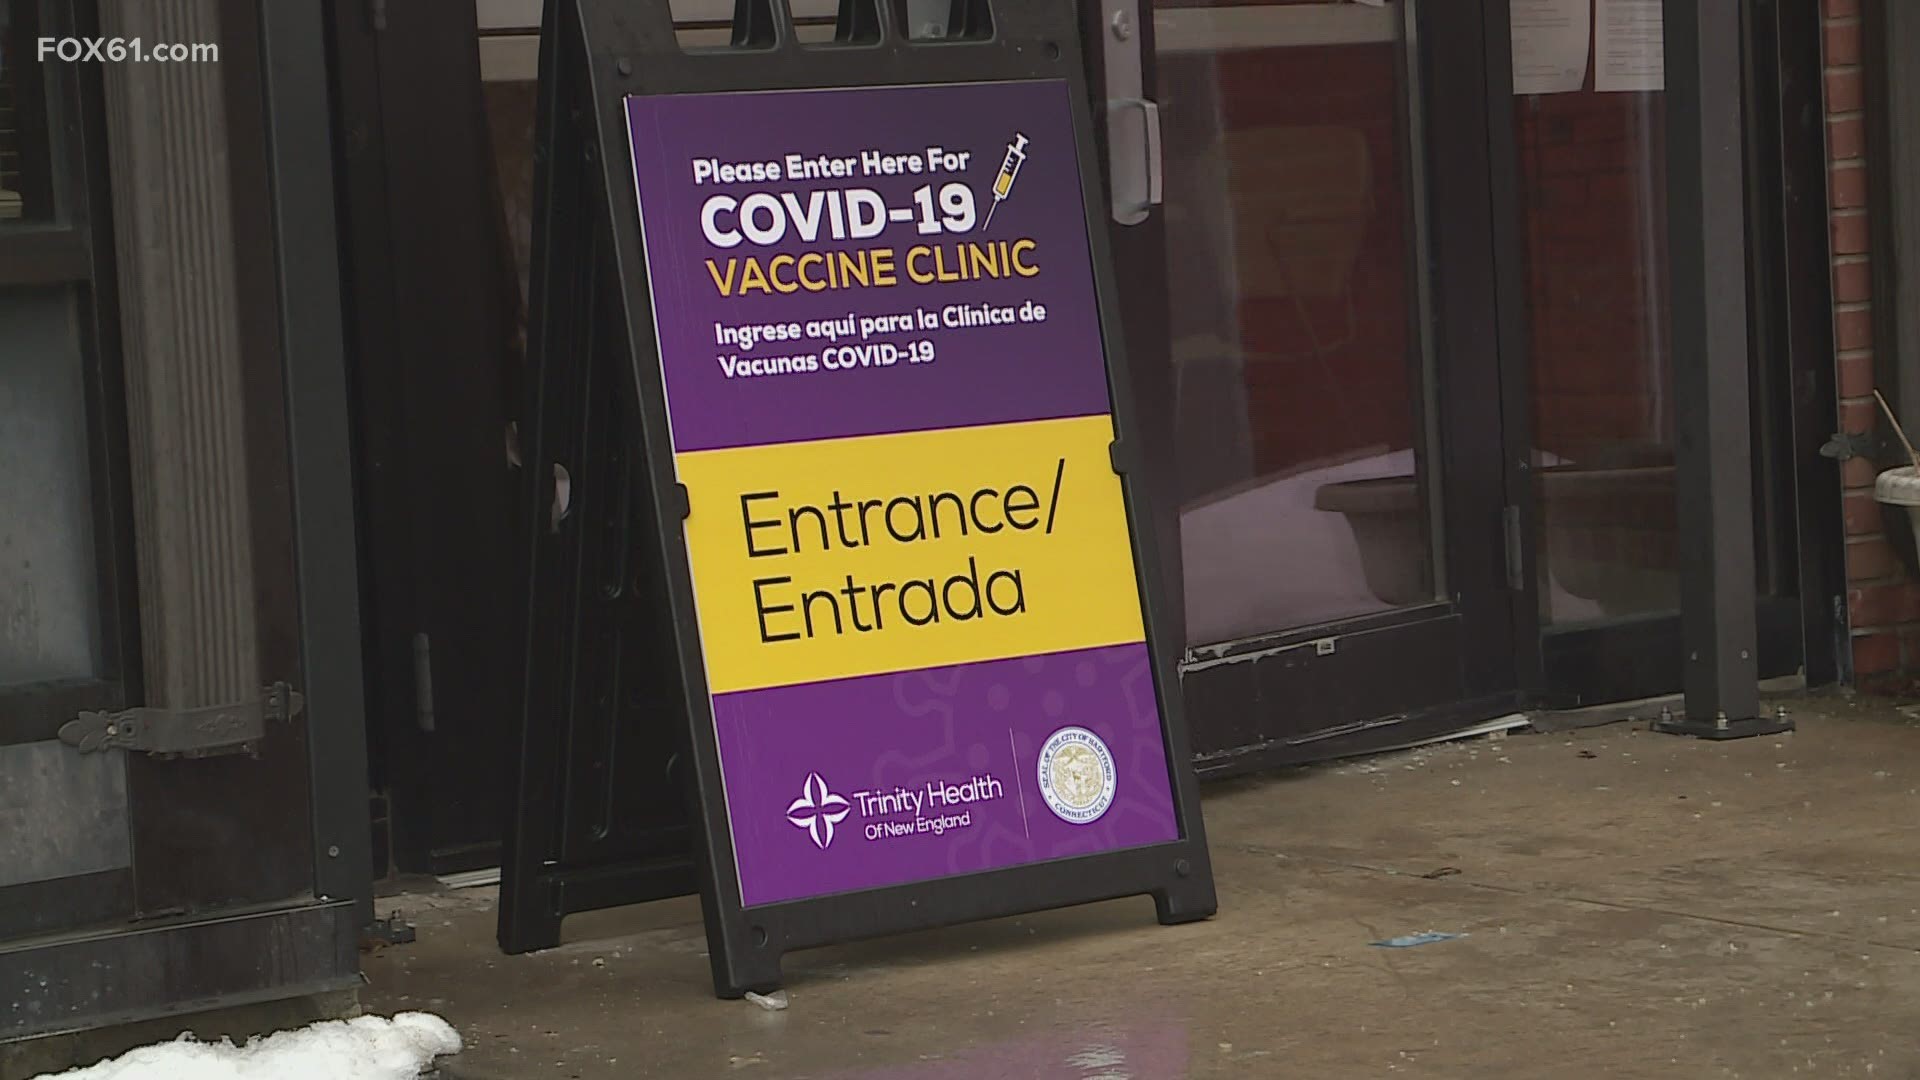 One of the clinics is located at the Parker Memorial Community Center where they will initially have available appointments for 240 vaccinations per day